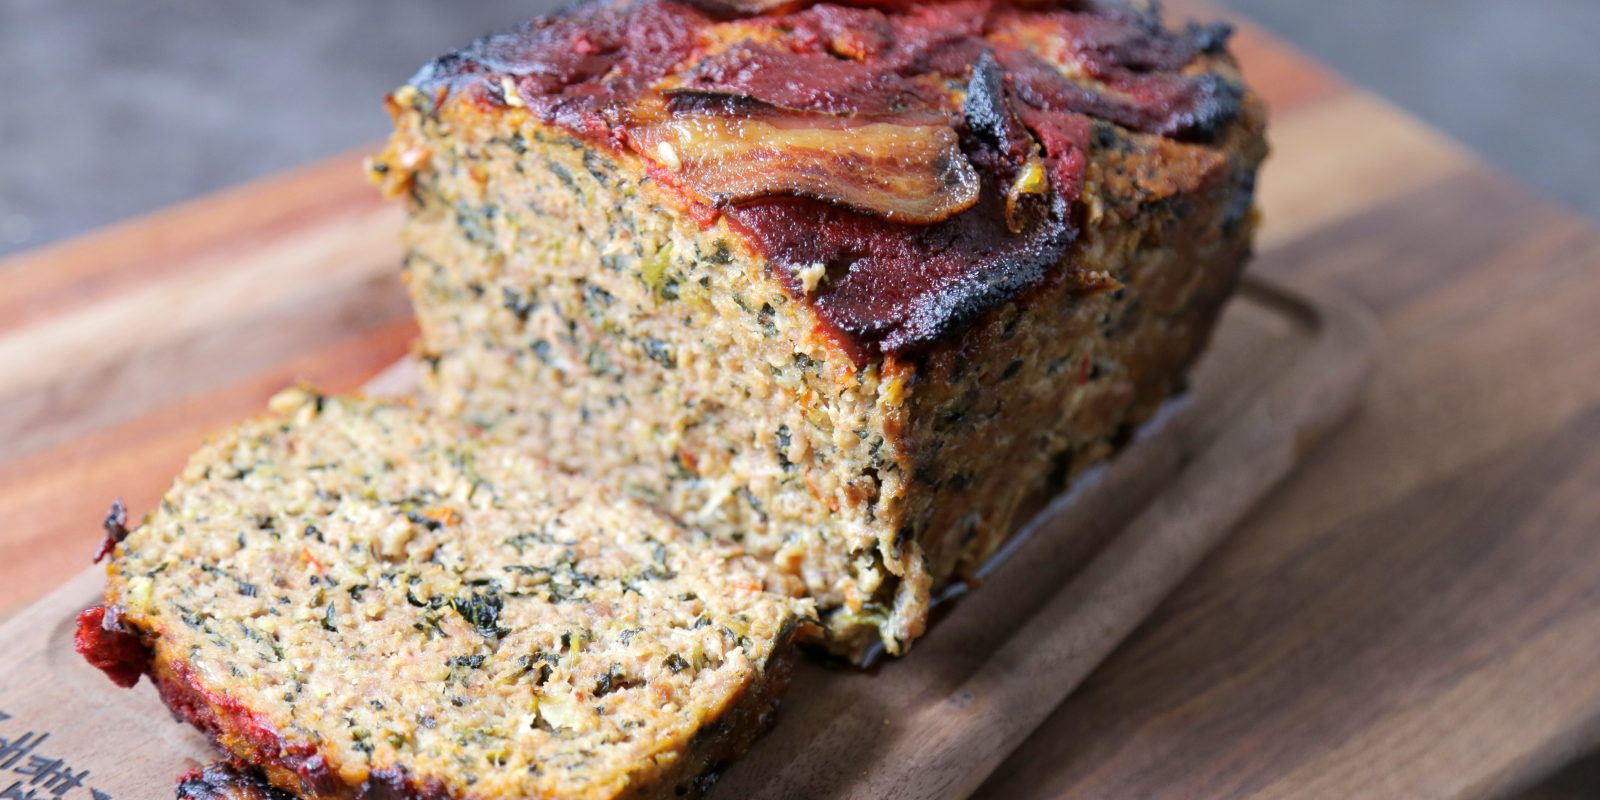 Andrew Zimmern's recipe for meatloaf